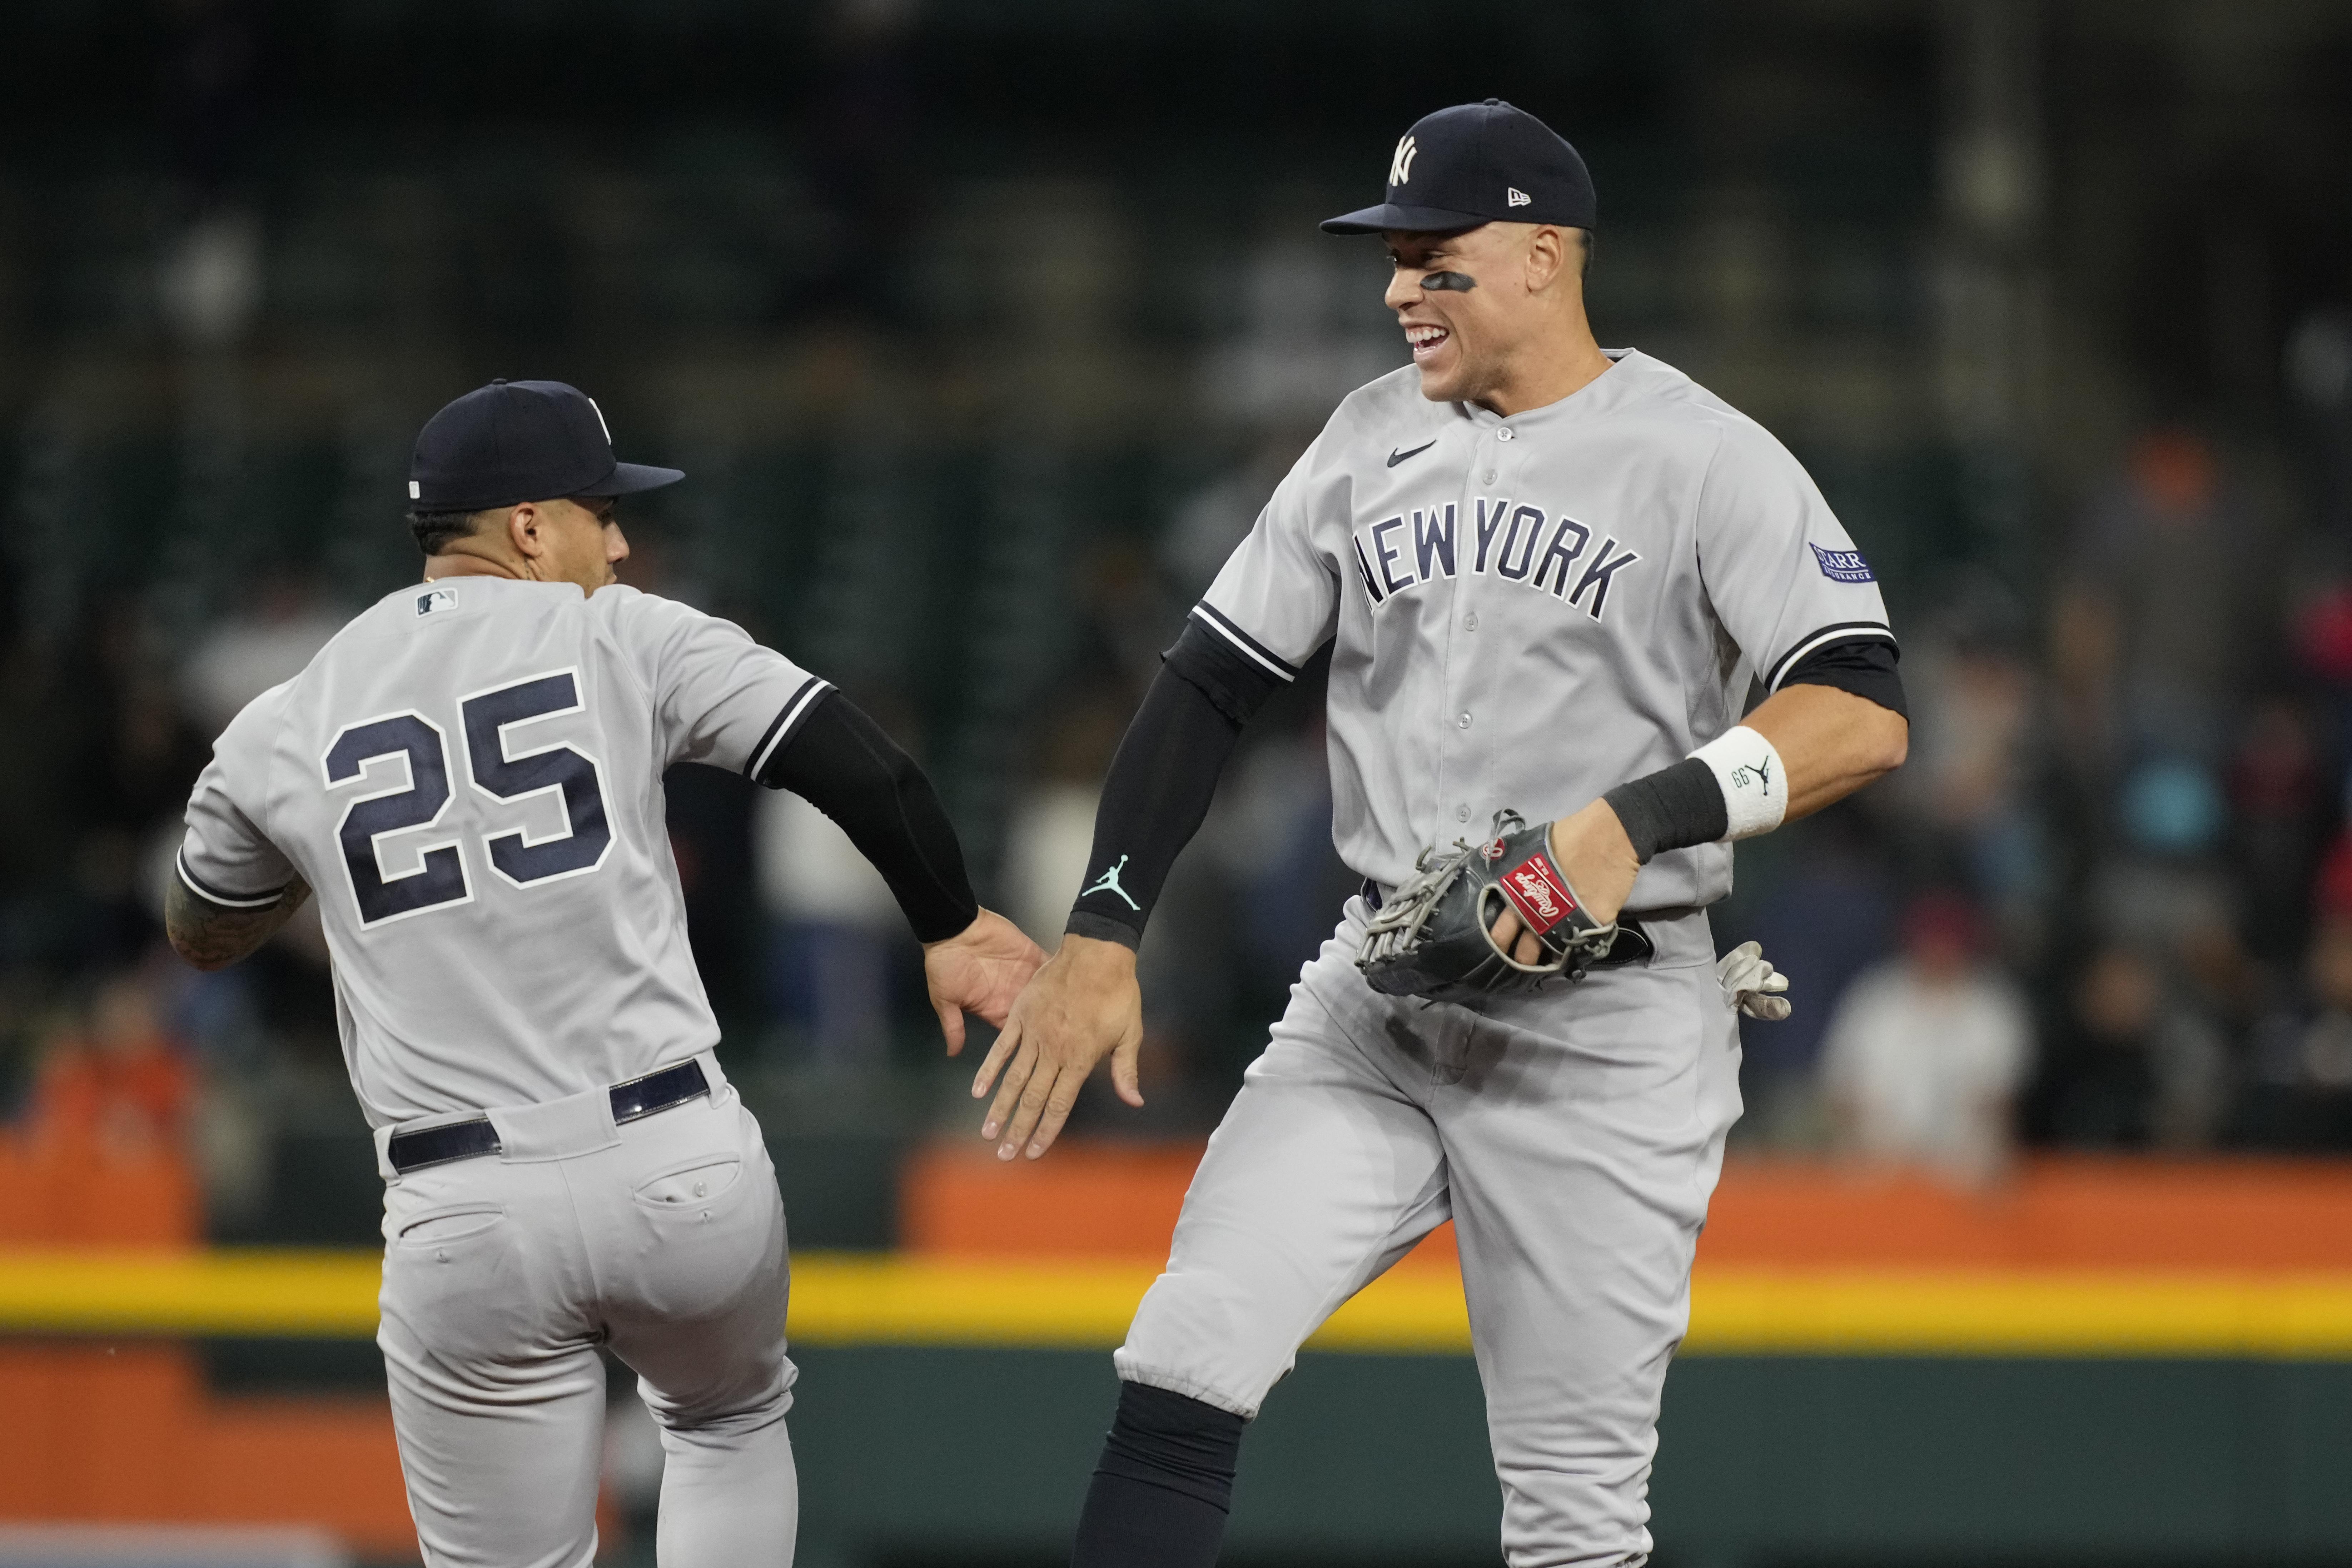 Yankees' Stanton on injuries: 'It's unacceptable this often